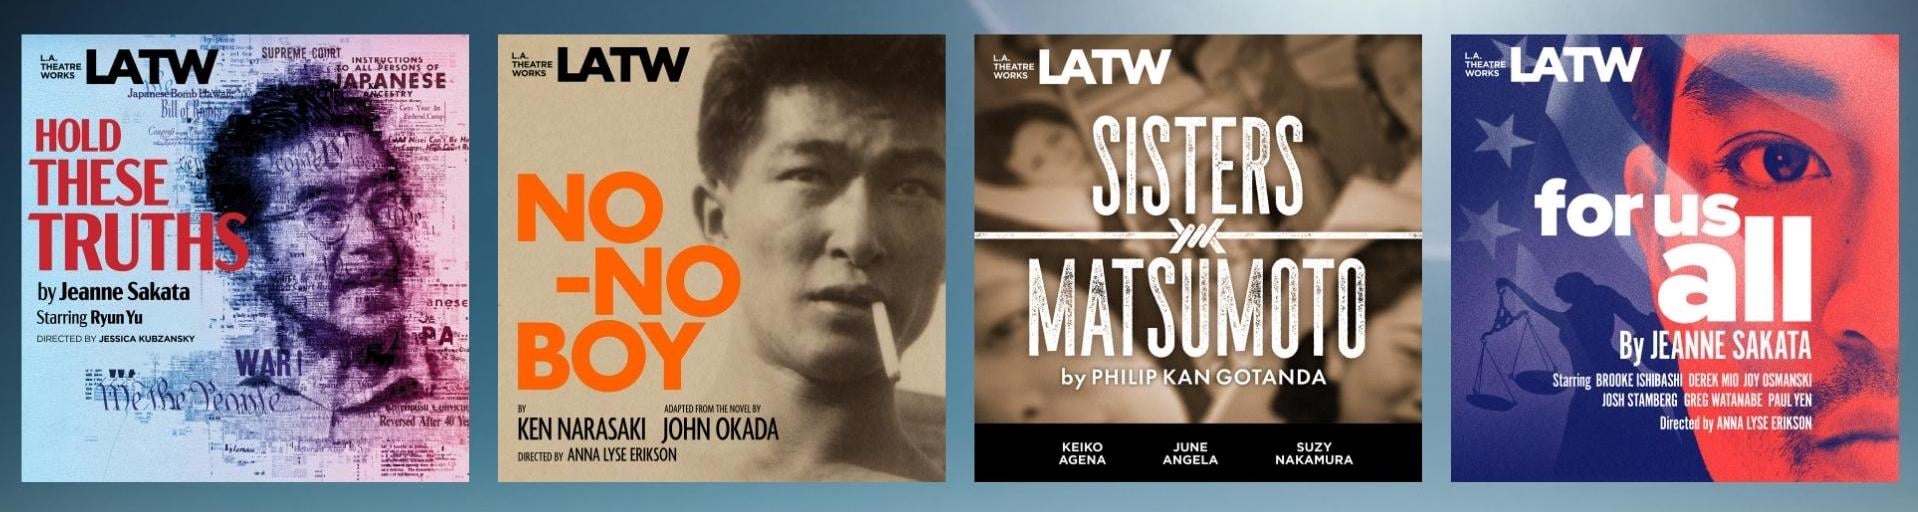 Covers for the Japanese American Civil Liberties collection titles